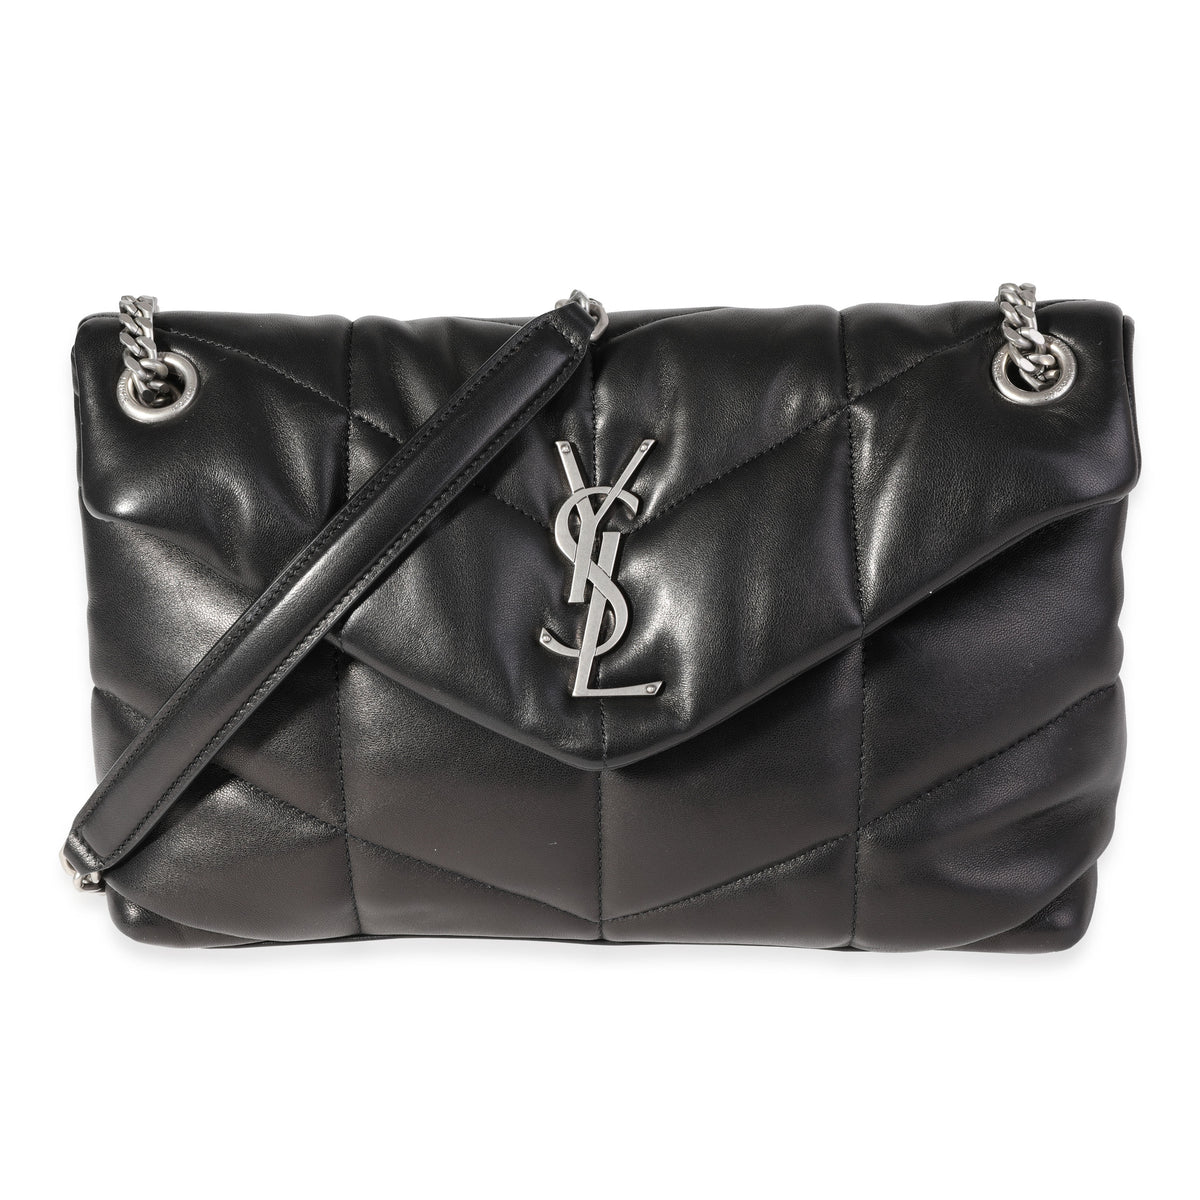 Black Loulou Puffer small quilted leather shoulder bag, SAINT LAURENT